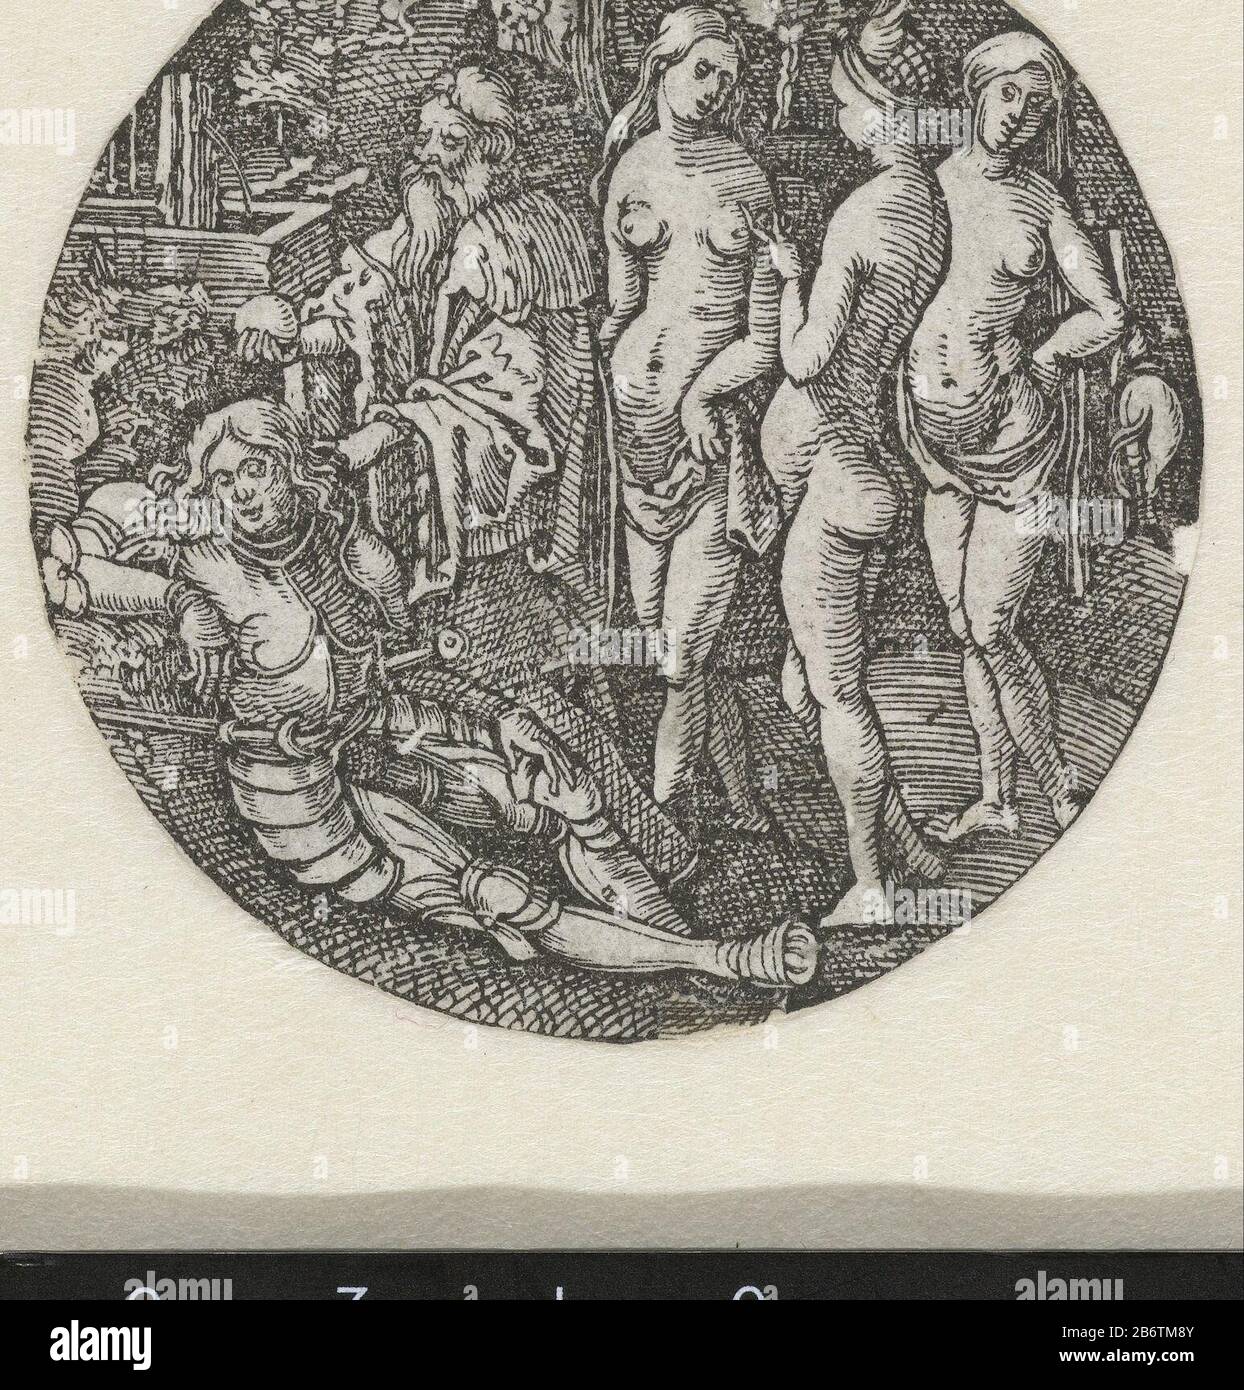 Het oordeel van Paris Round depicting three scantily clad women , an elderly man in a heavy jacket and a younger man in armor. The older man (Mercury) offers the young man (Paris), which seems to sleep, an apple, to one of the three women (Venus, Minerva and Juno) to geven. Manufacturer : printmaker Hans Springinklee (attributed to) printmaker Albrecht Dürer (school) Place manufacture: Nuremberg Date: 1510 - 1520 Physical features: woodcut material: paper Technique: woodcut dimensions: sheet: d 57 mm Subject: the Judgment of Paris (Mercury present) Stock Photo